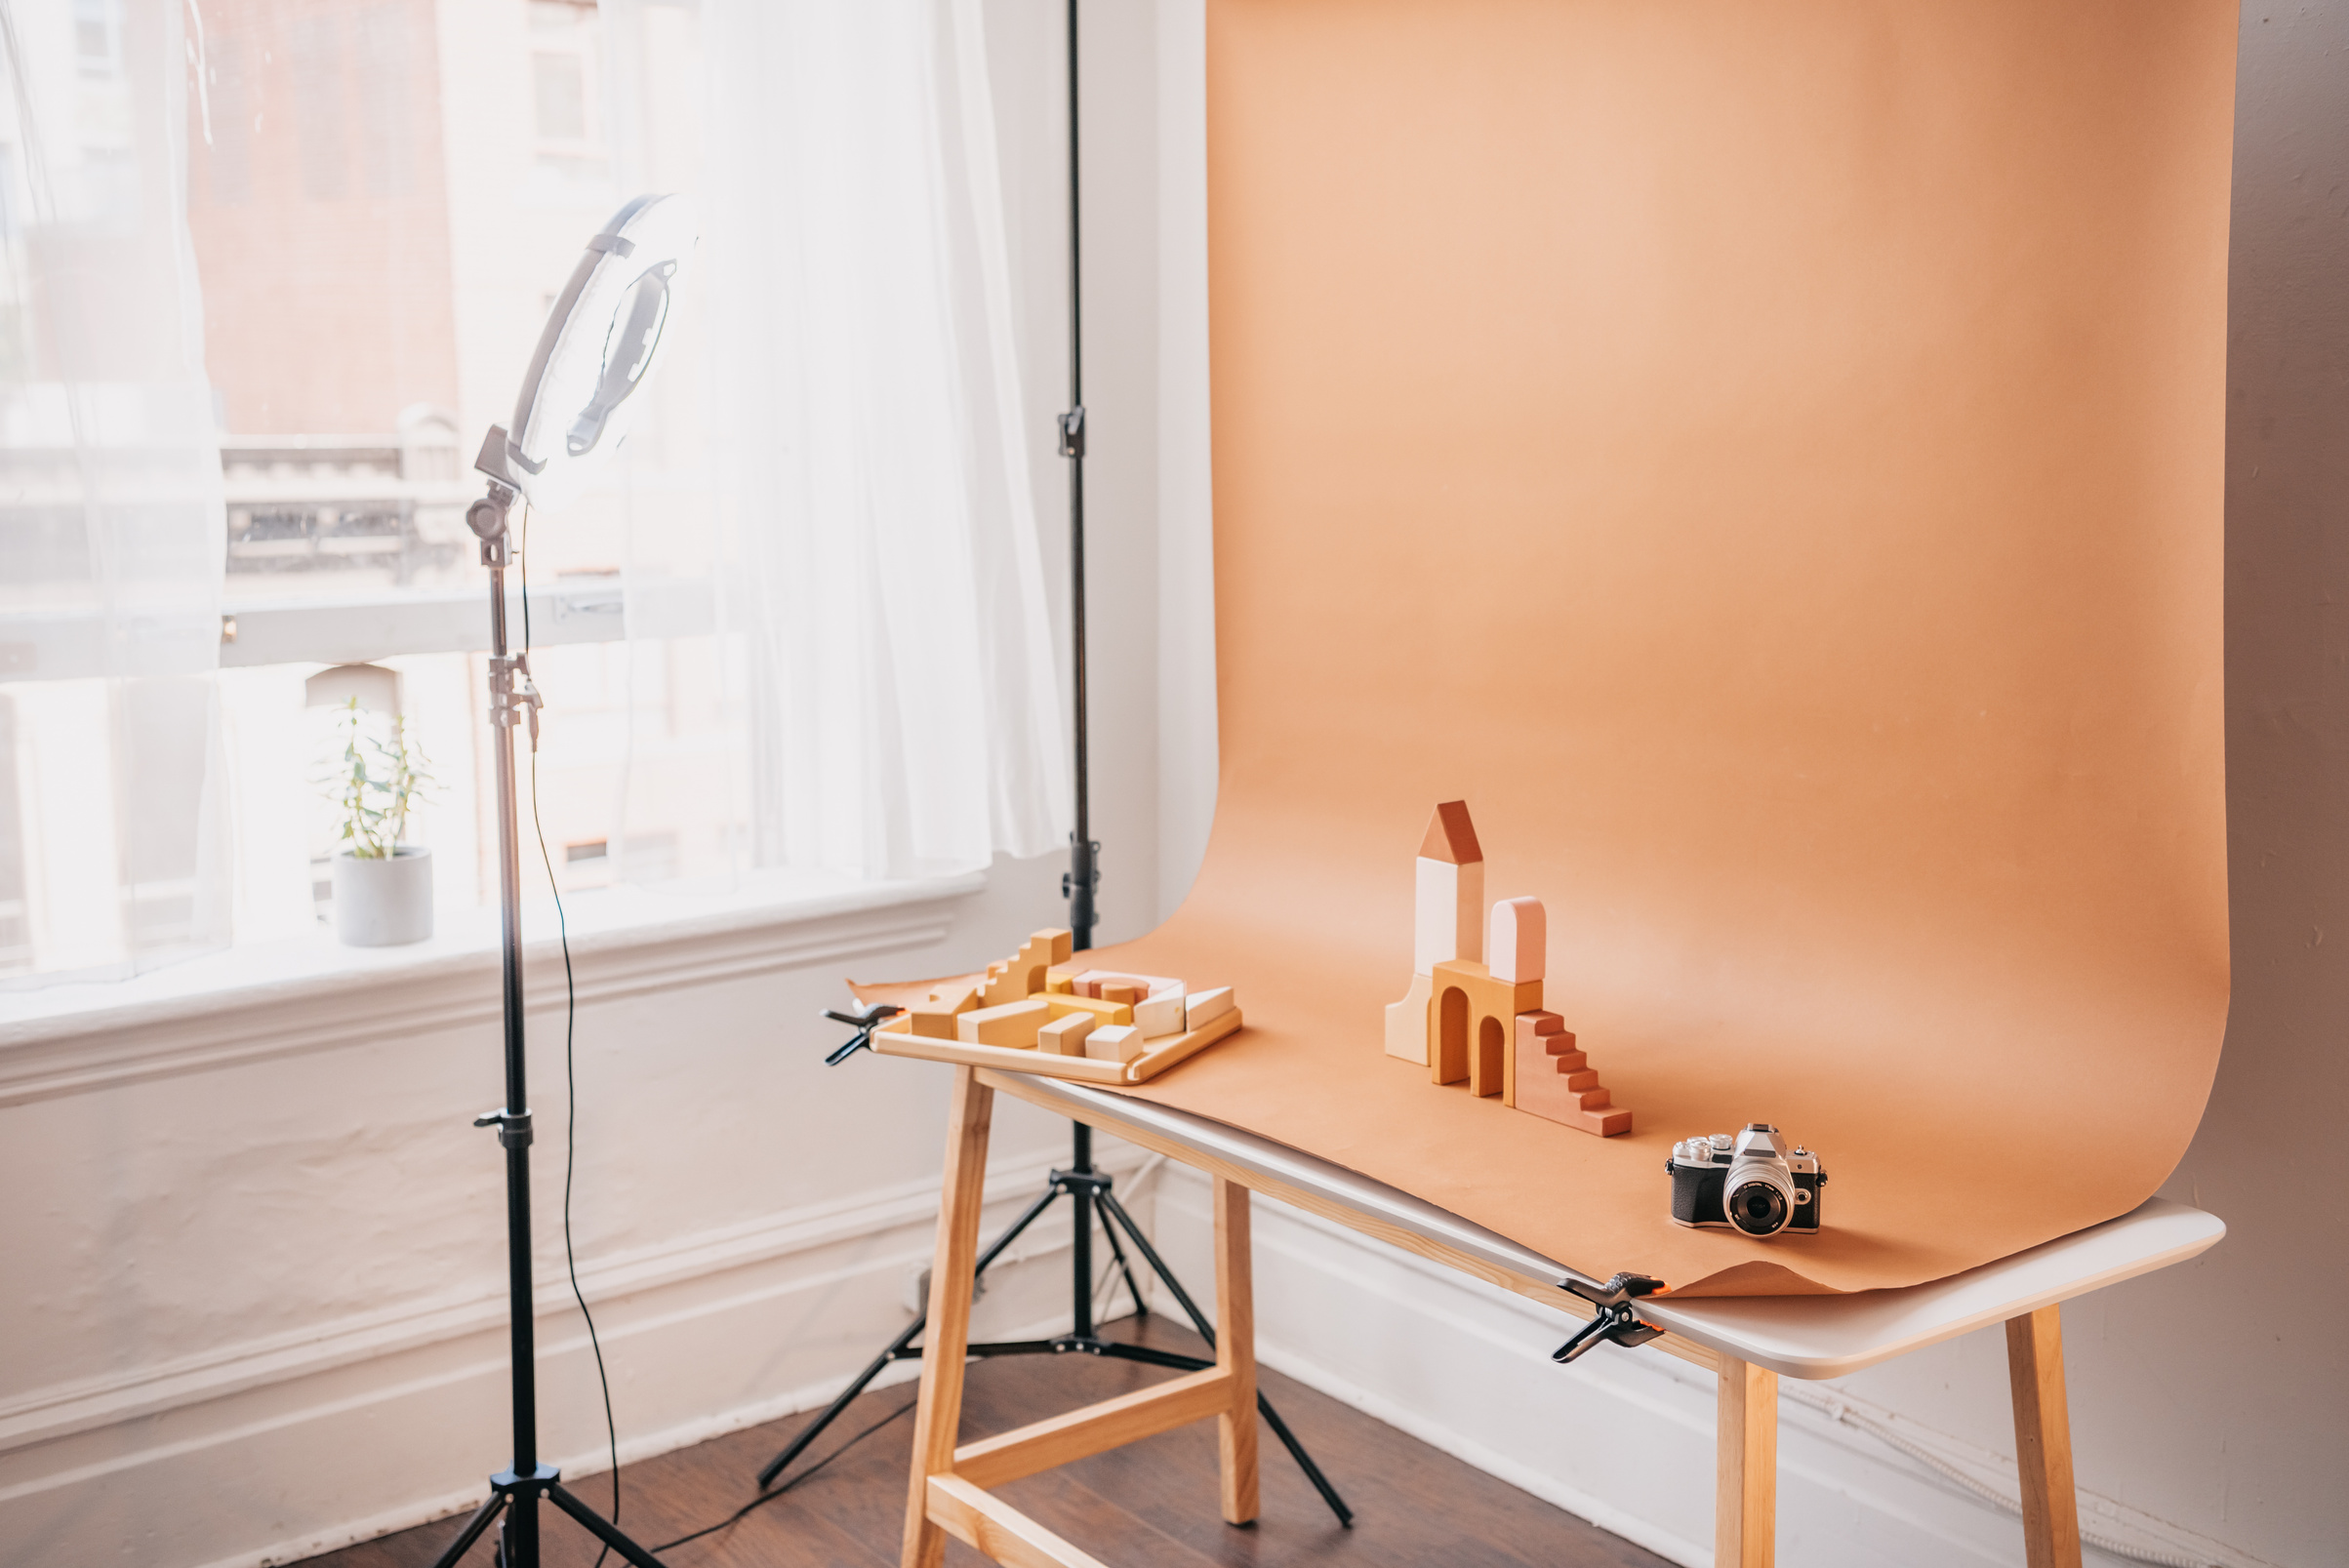 Wooden Blocks in a Photography Studio